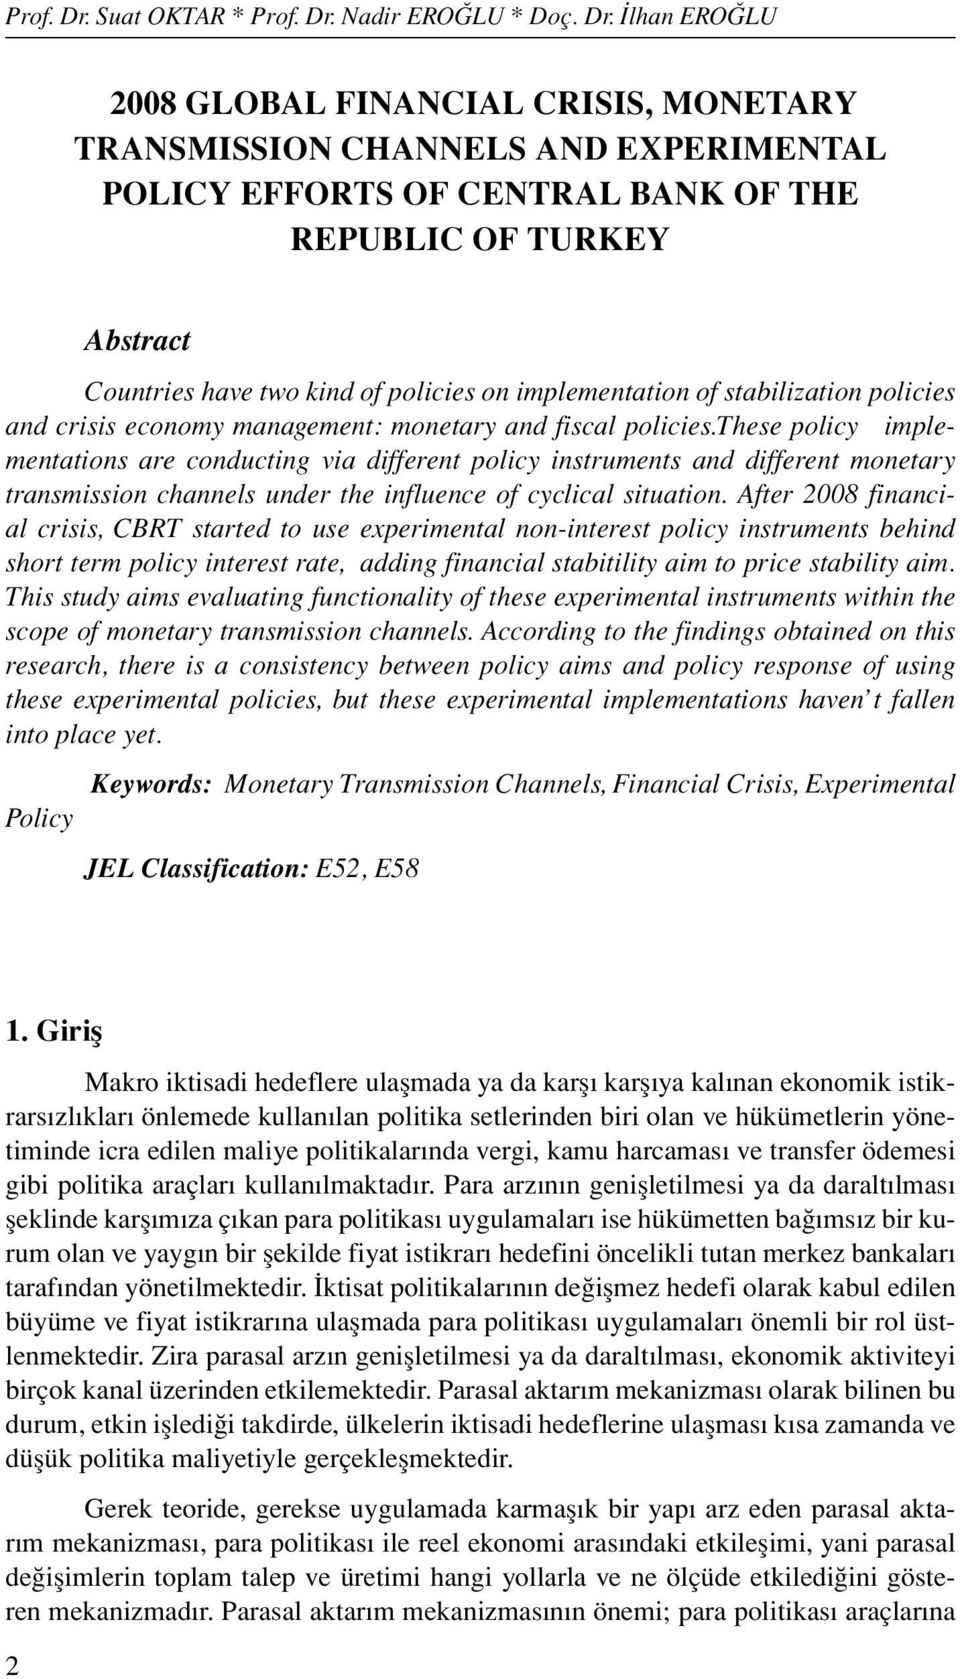 İlhan EROĞLU 2008 GLOBAL FINANCIAL CRISIS, MONETARY TRANSMISSION CHANNELS AND EXPERIMENTAL POLICY EFFORTS OF CENTRAL BANK OF THE REPUBLIC OF TURKEY Abstract Countries have two kind of policies on